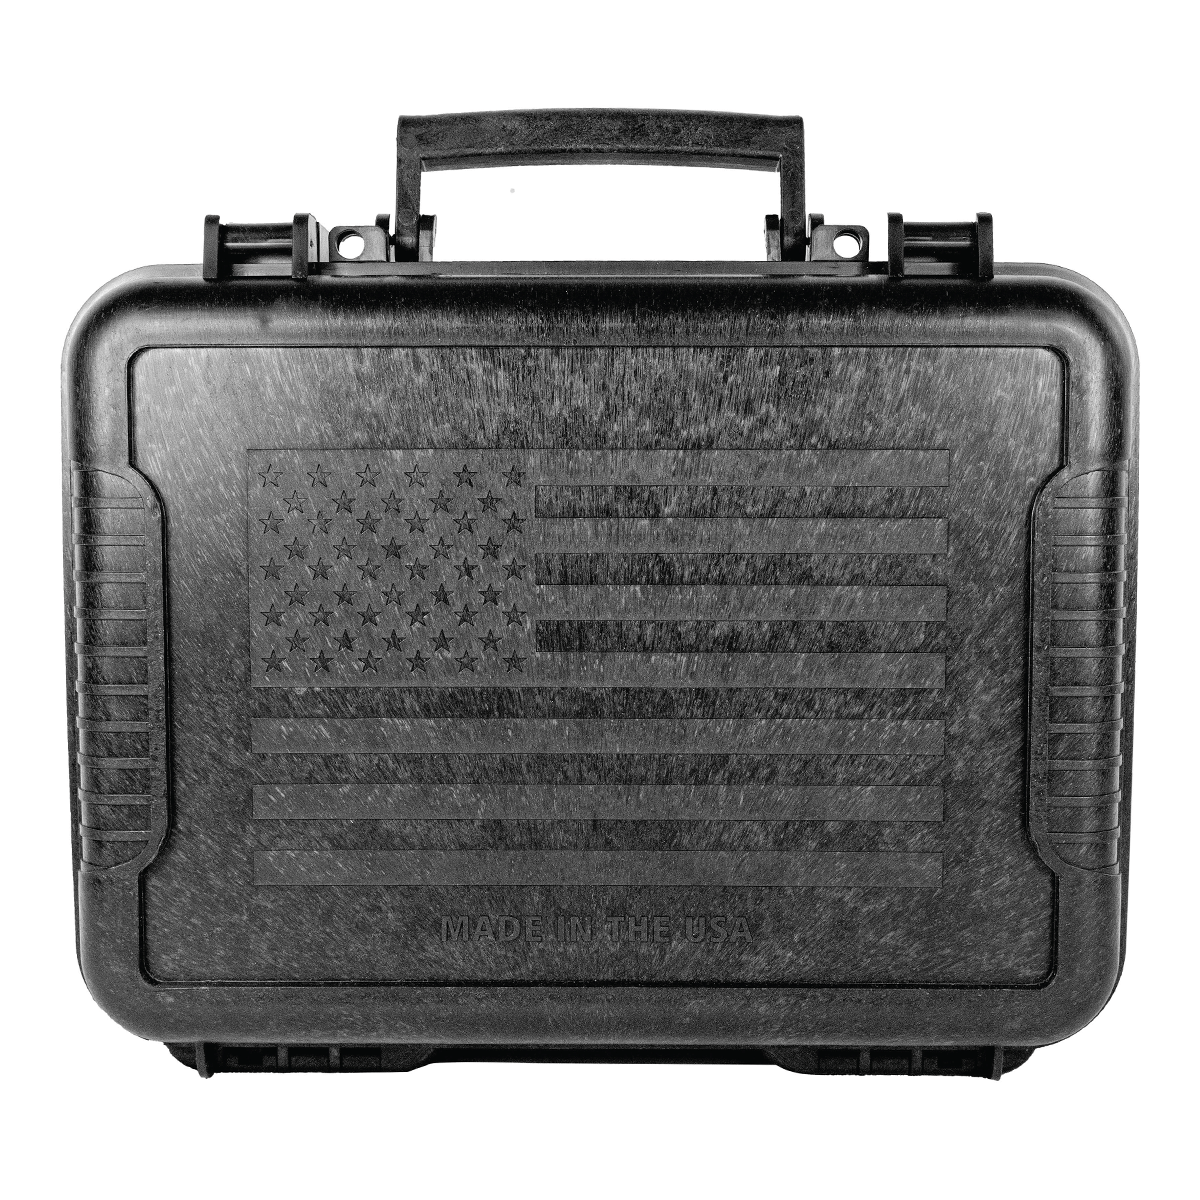 The Outdoor Connection US Flag 11" Hard Pistol Case